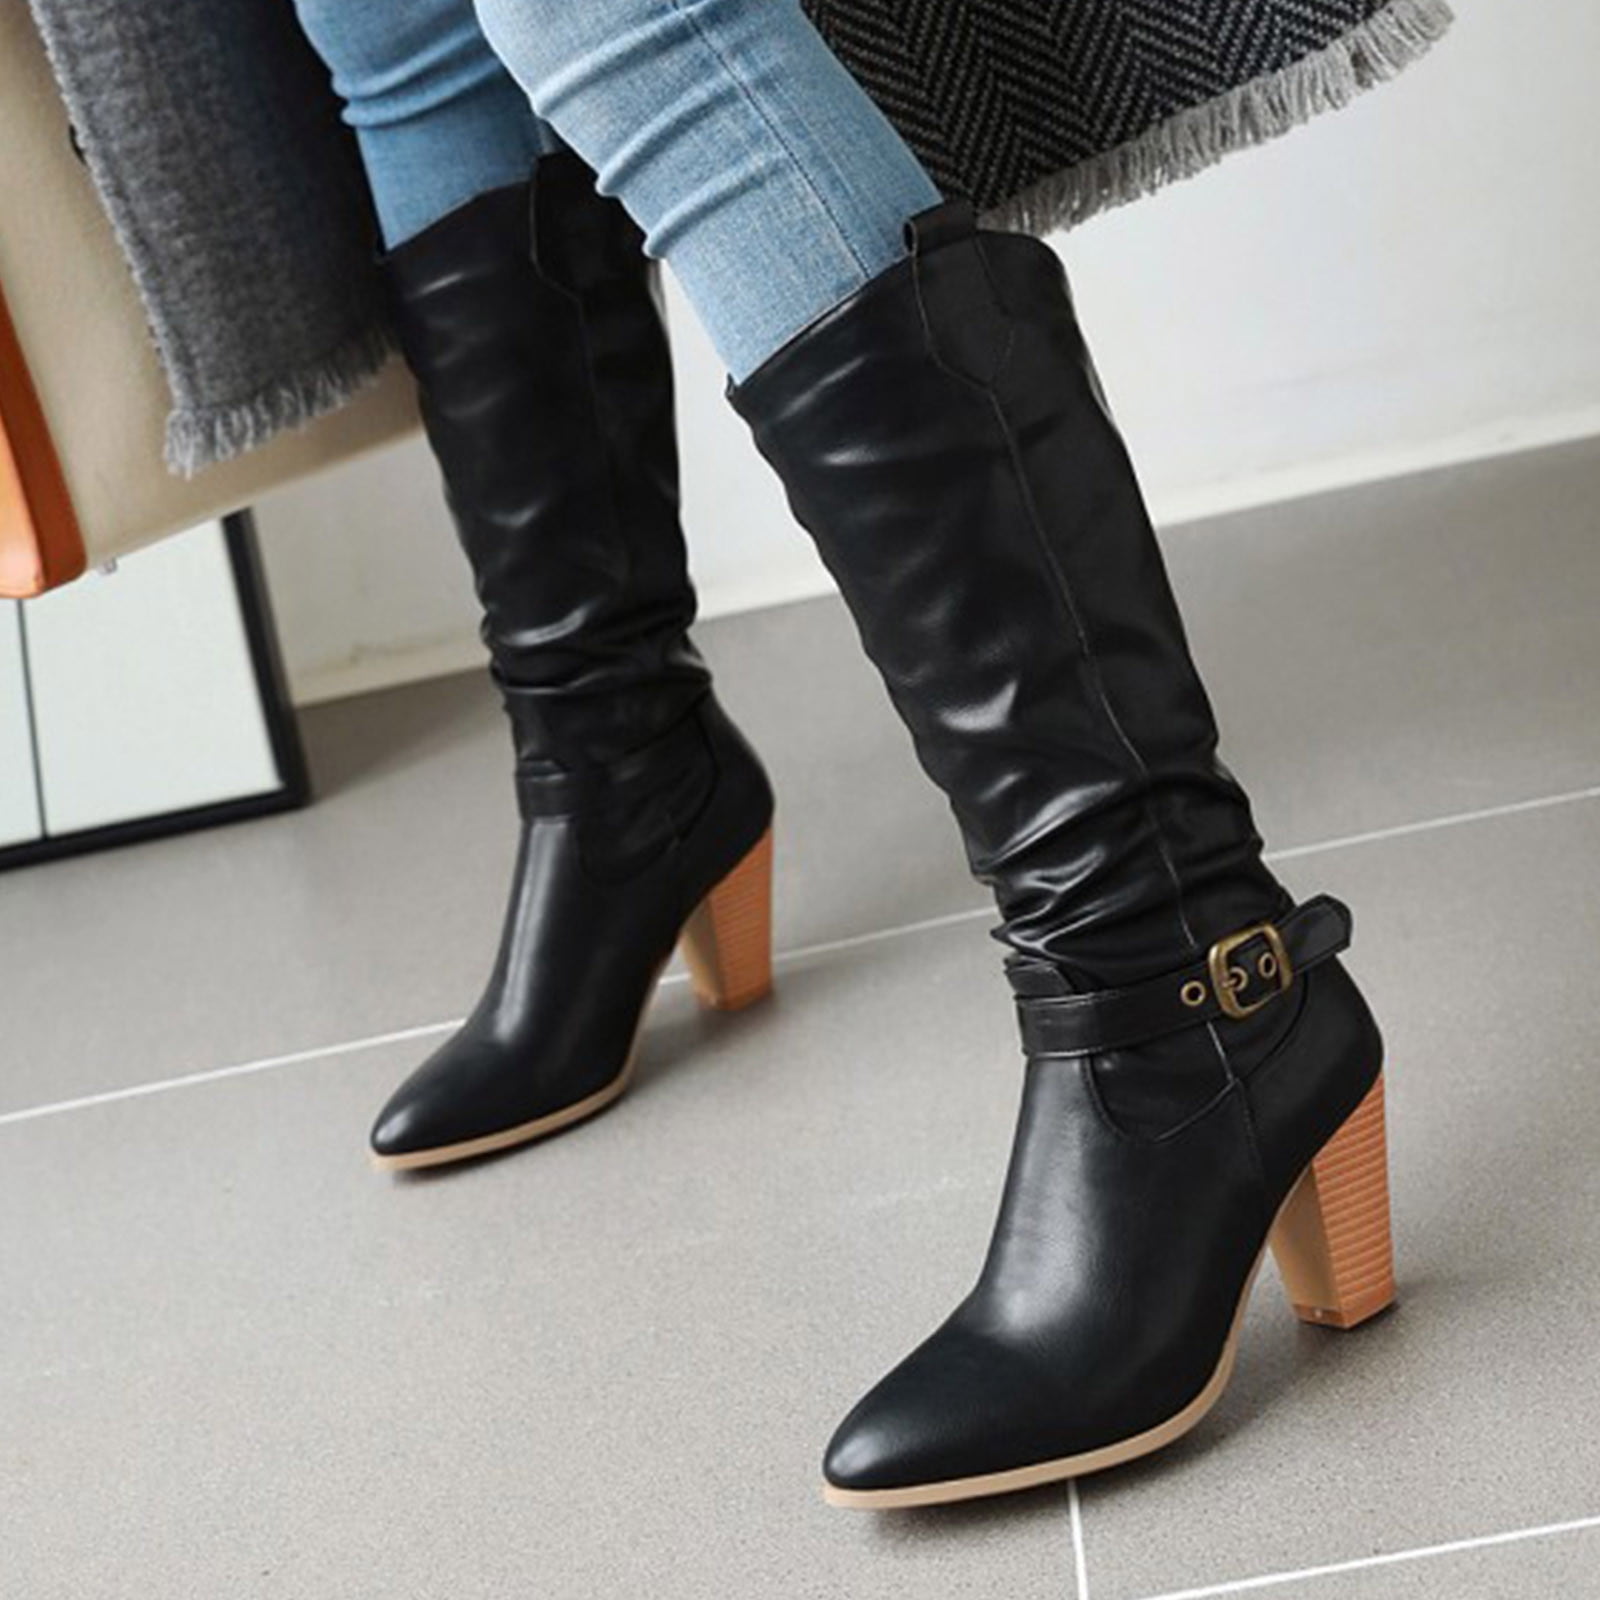 Women's Pull On Knight Boots Suede Mid-Calf Belt-Buckle Slouch Shoes plus size